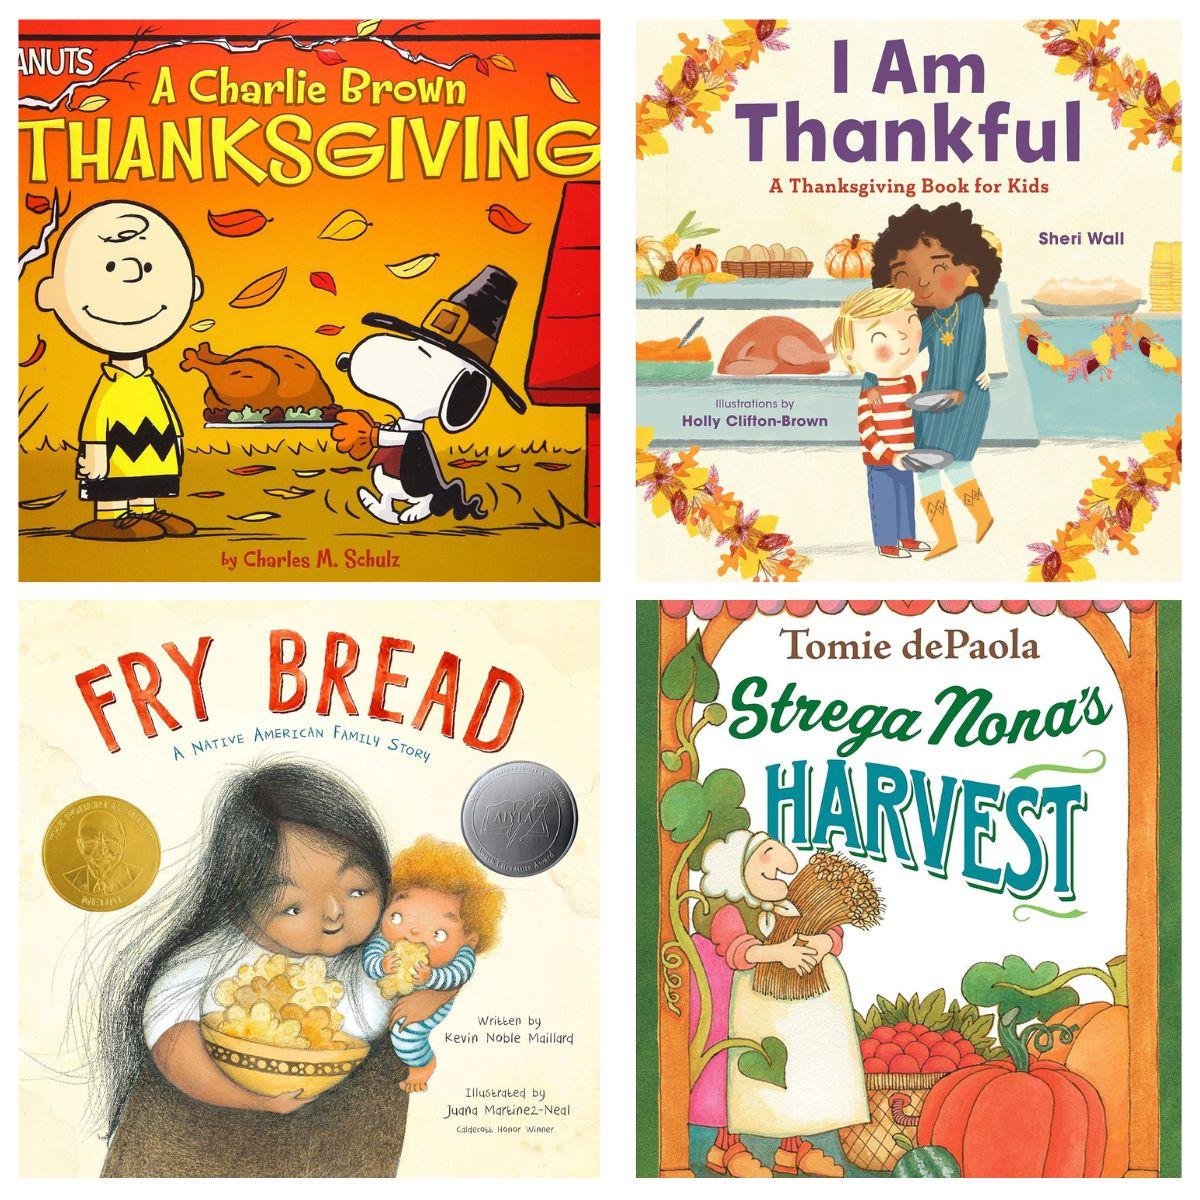 Thanksgiving Books for Kids collage